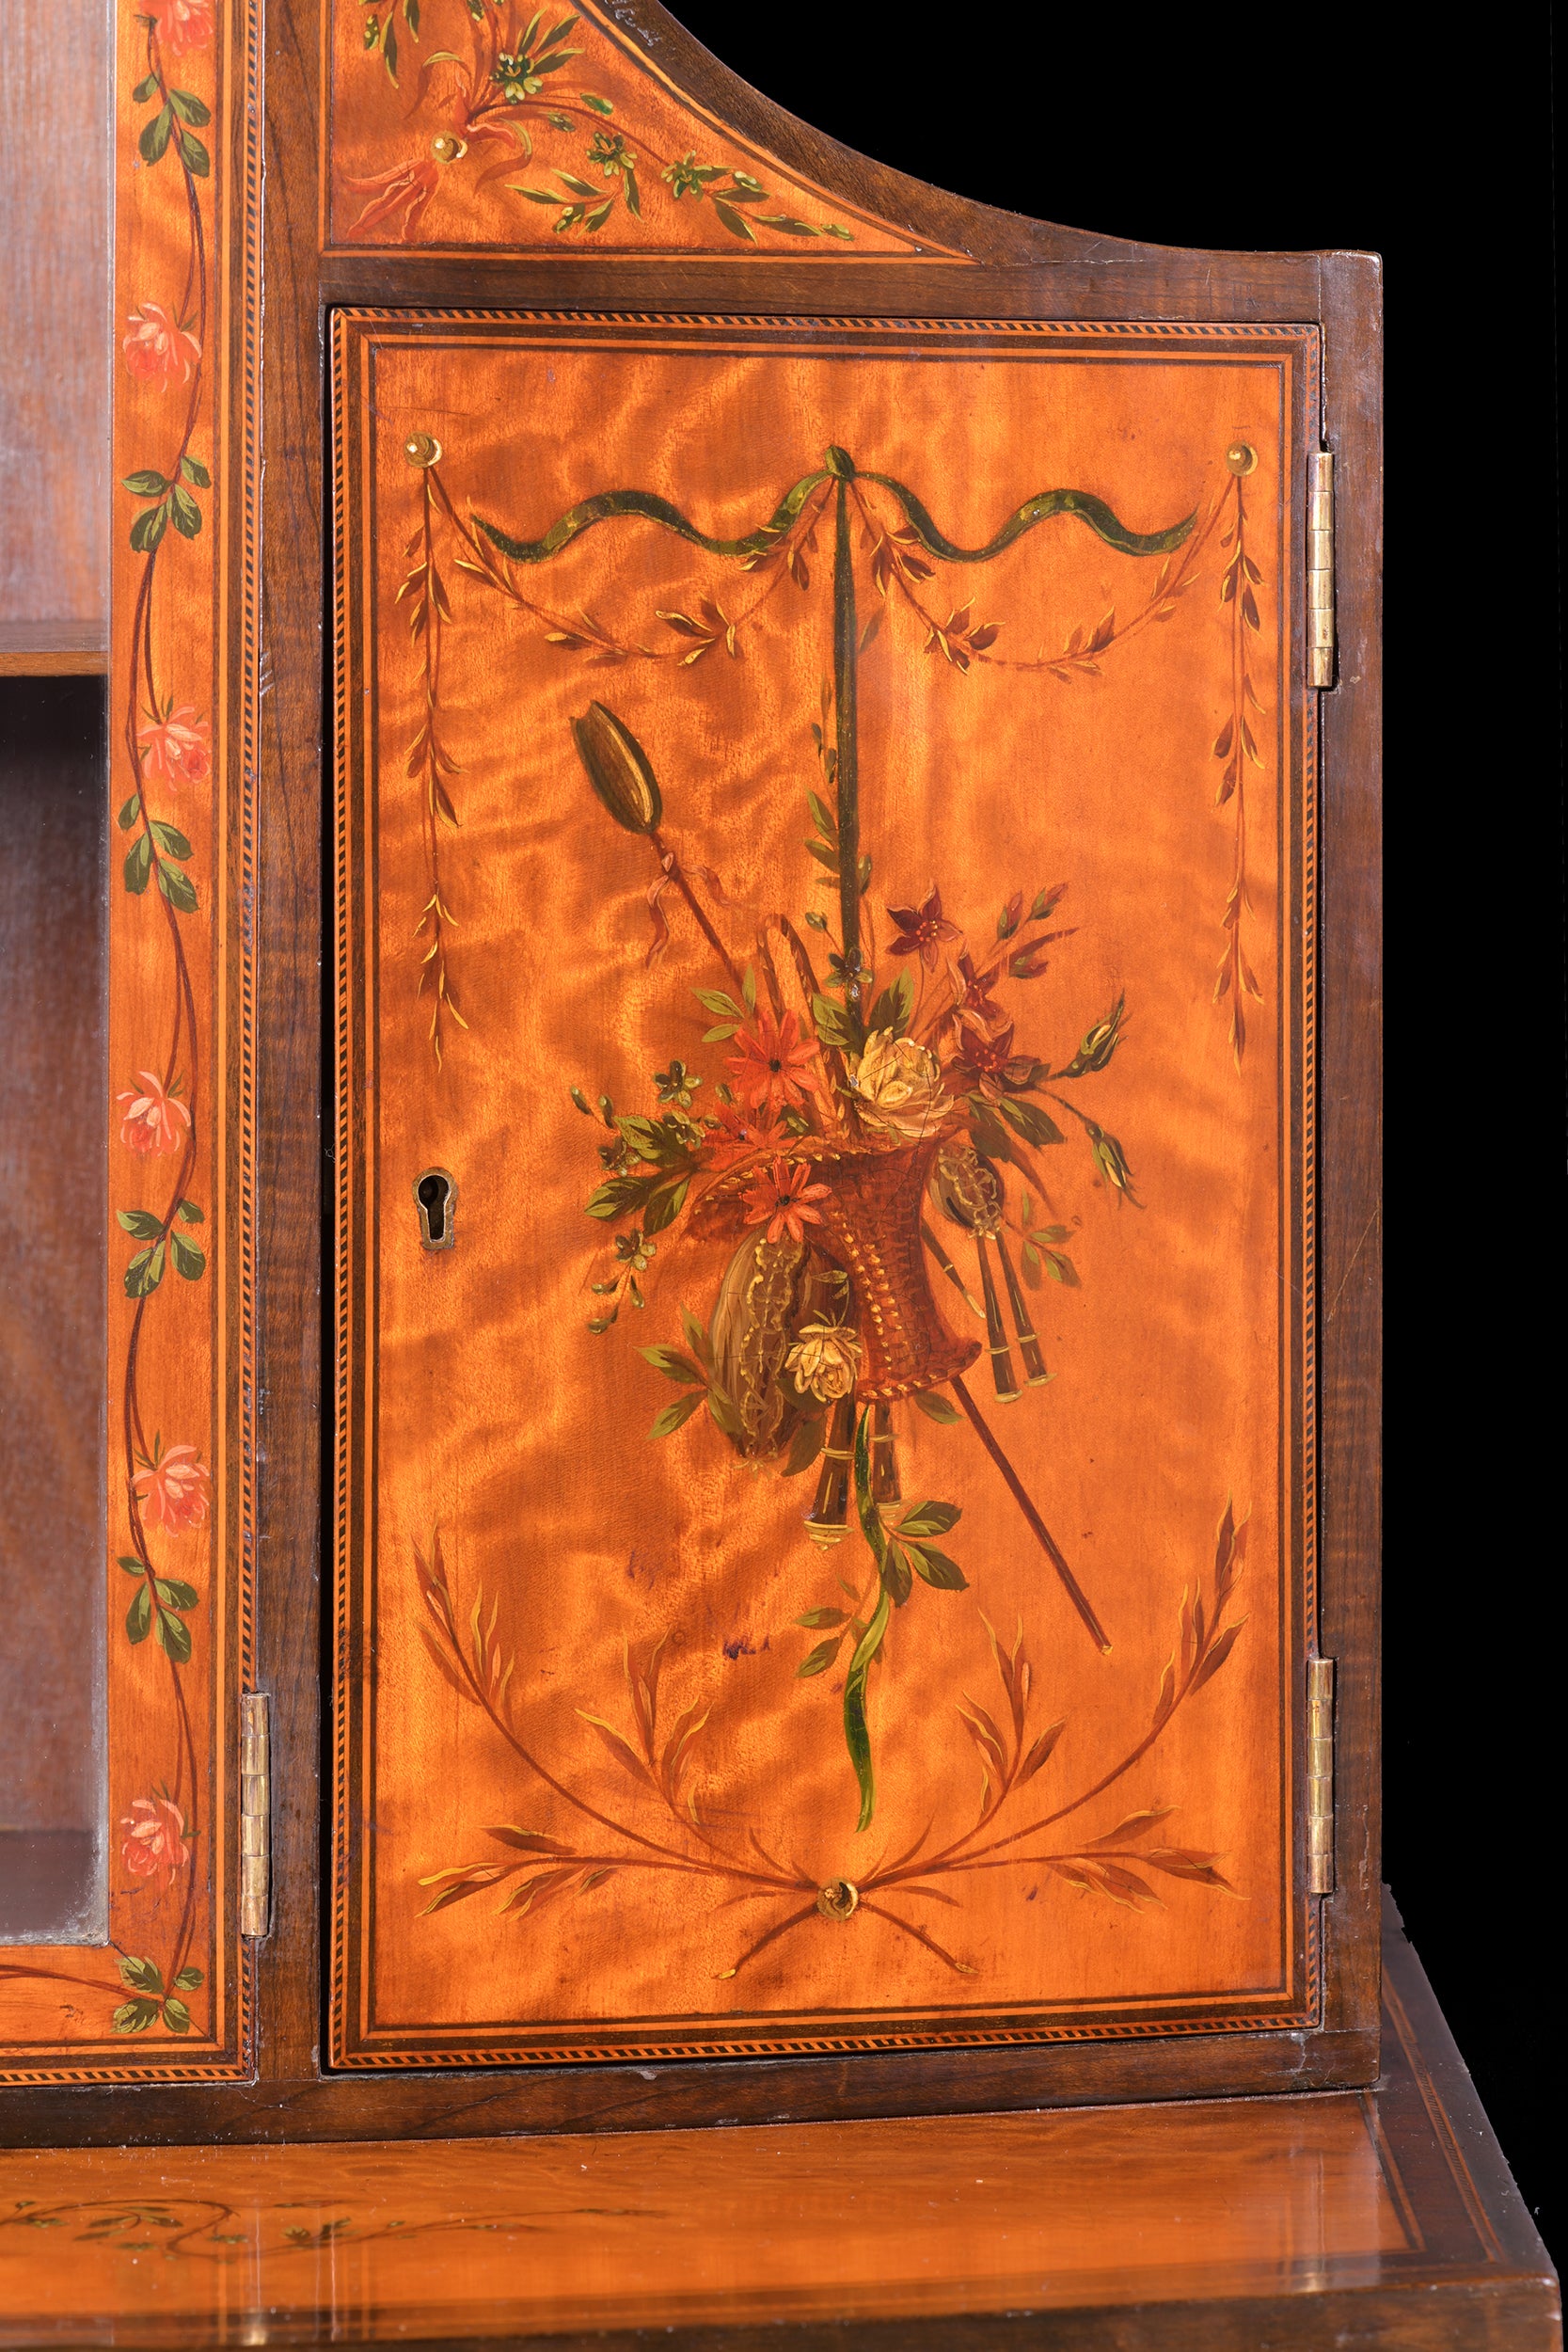 18TH CENTURY SATINWOOD SIDE CABINET - REF No. 4062